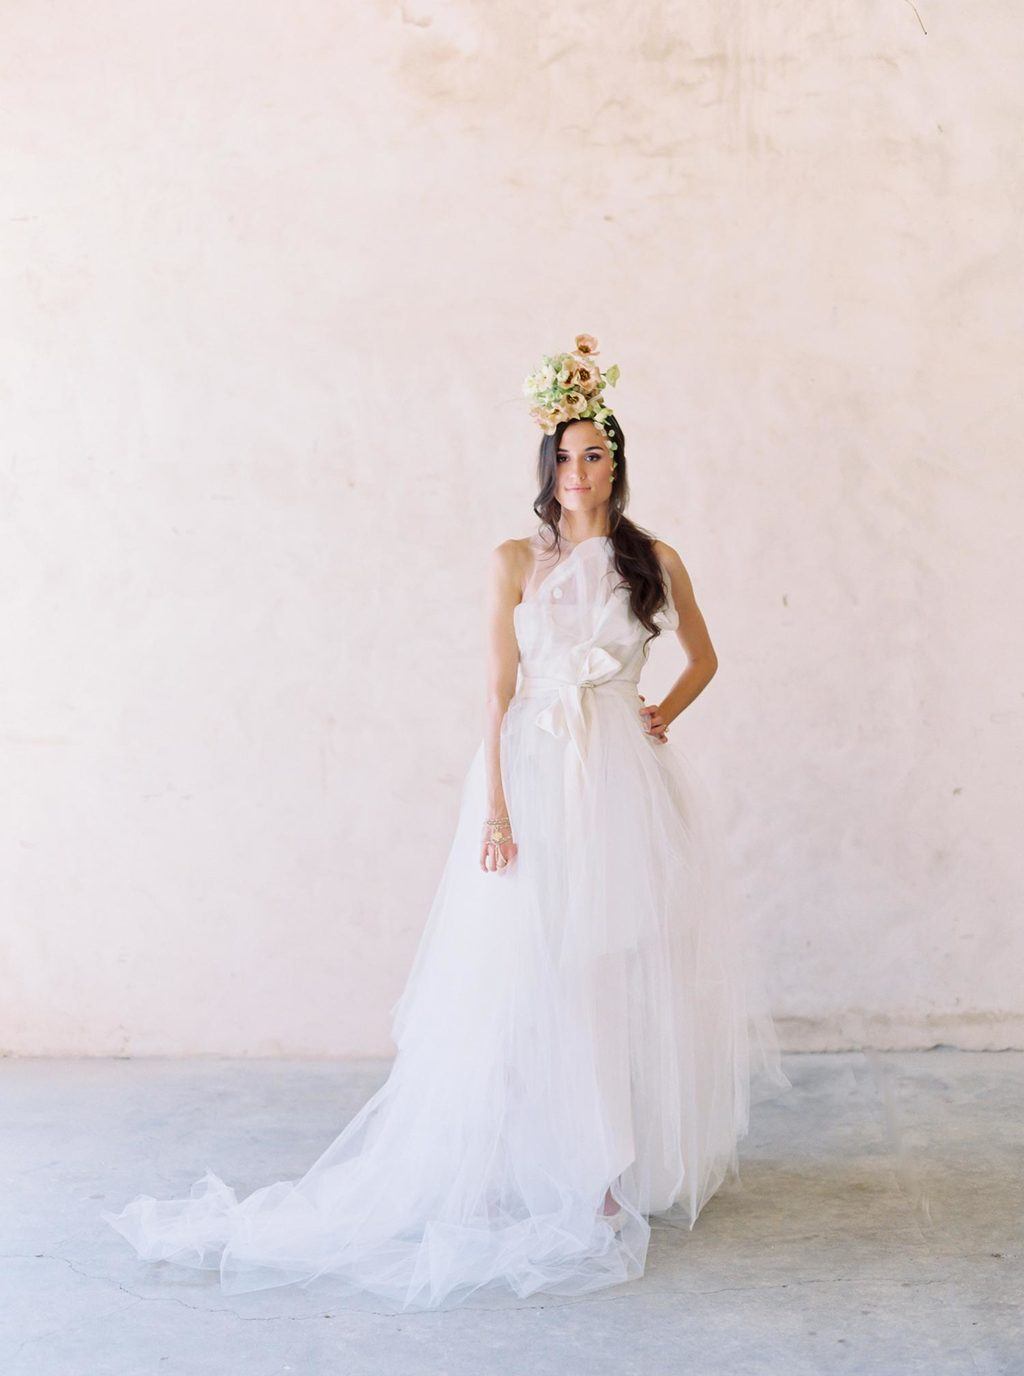 butterfly inspired wedding dress with floral headpiece